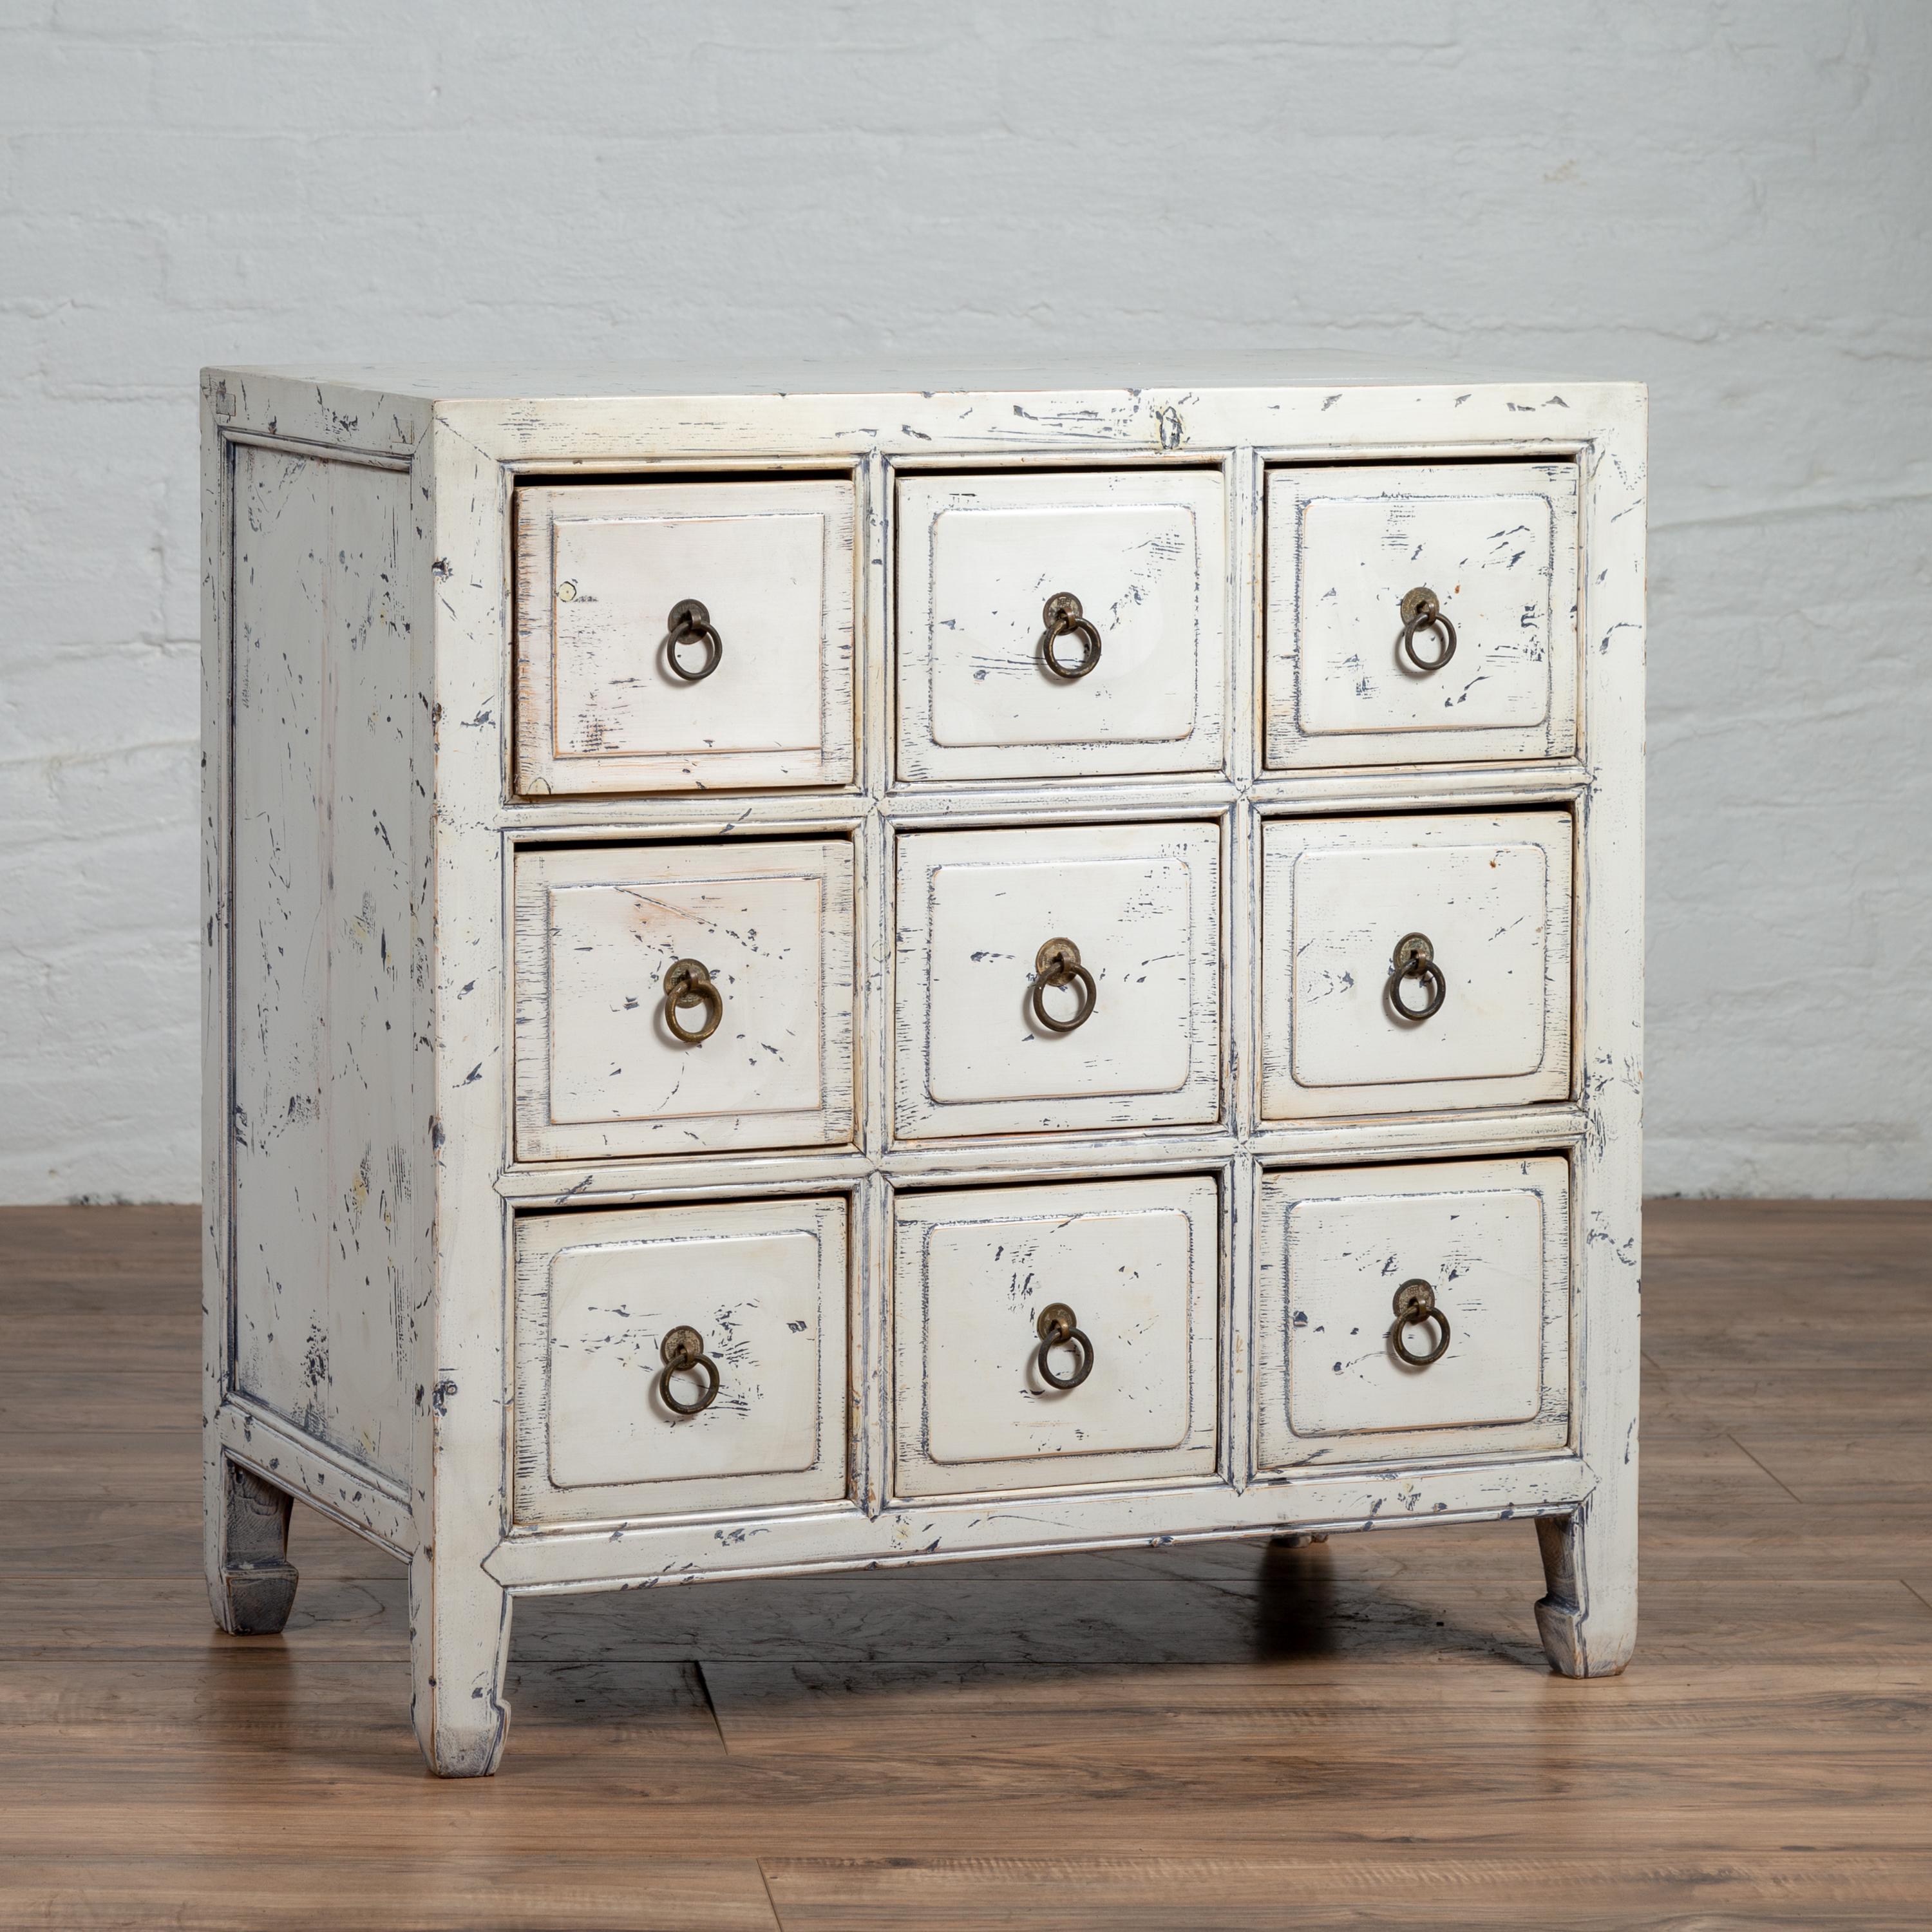 Chinese 1950s White Painted Nine-Drawer Apothecary Chest with Distressed Finish 1